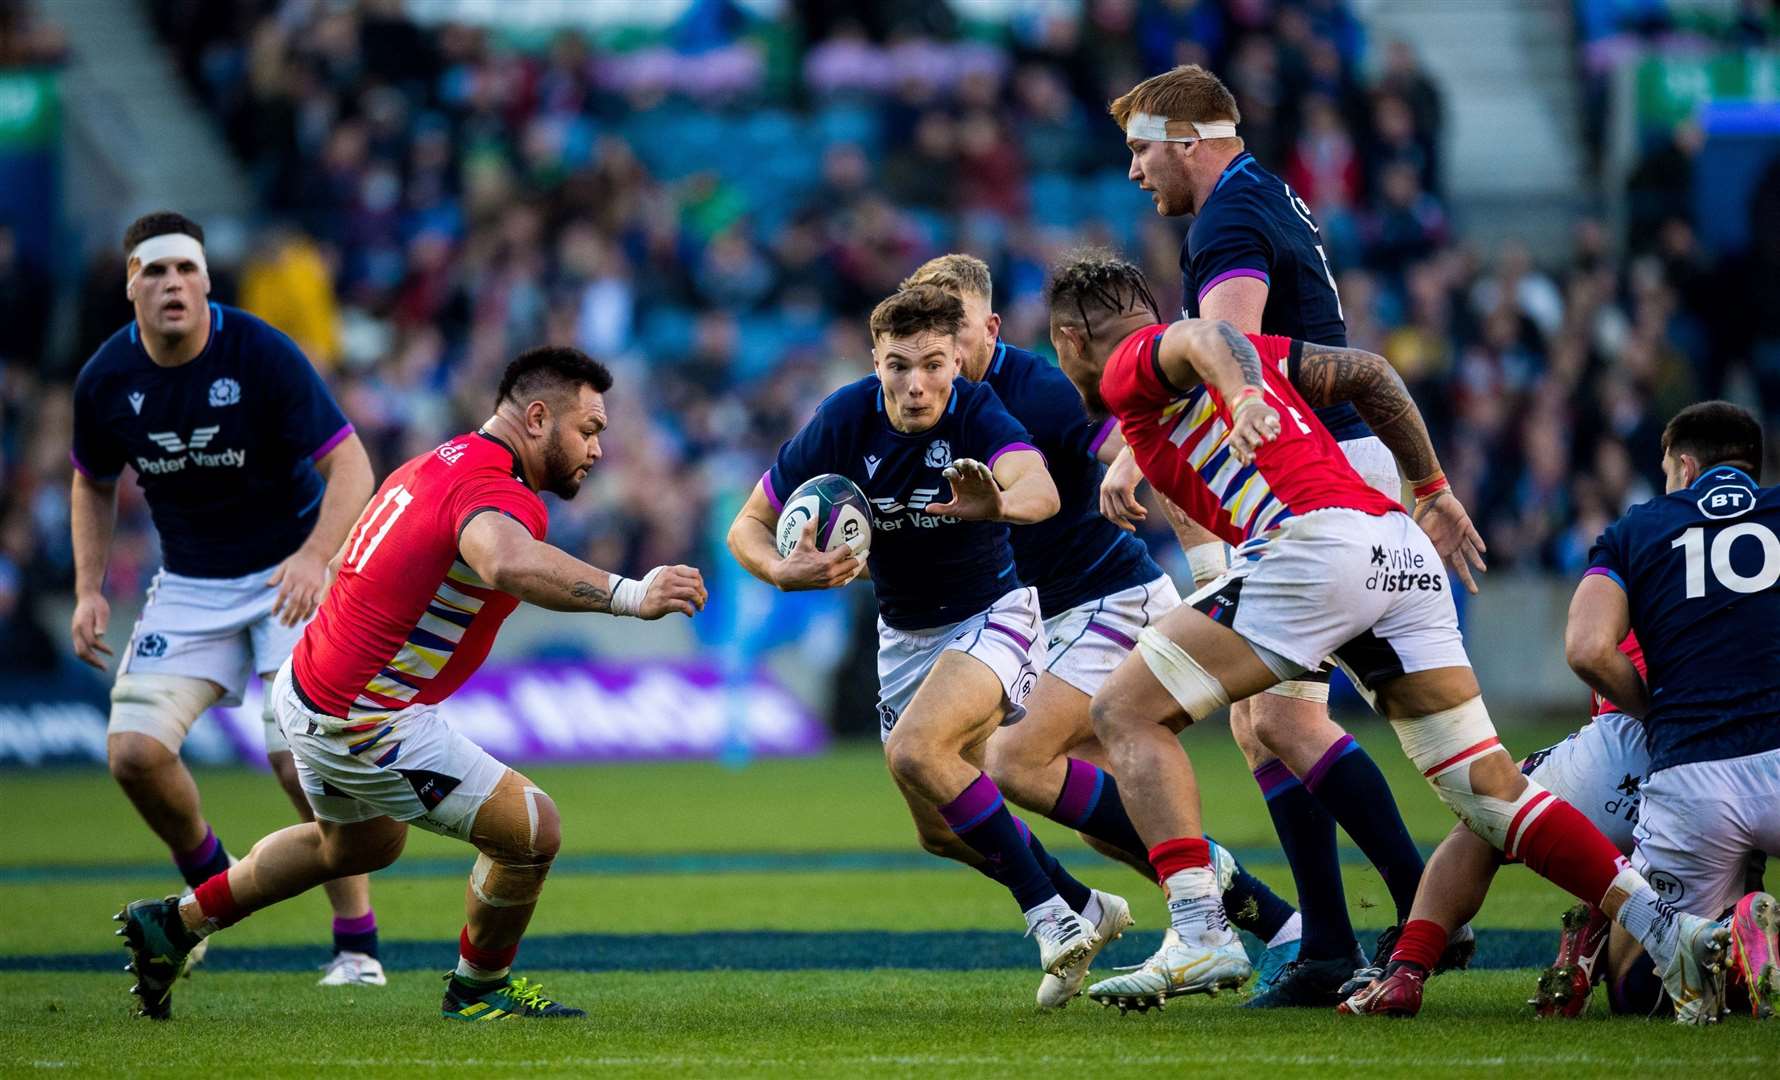 Jamie Dobie (centre) went from Highland’s minis to the Scotland national team – and now he will return to Inverness with the Glasgow Warriors. Picture: SNS Group/SRU